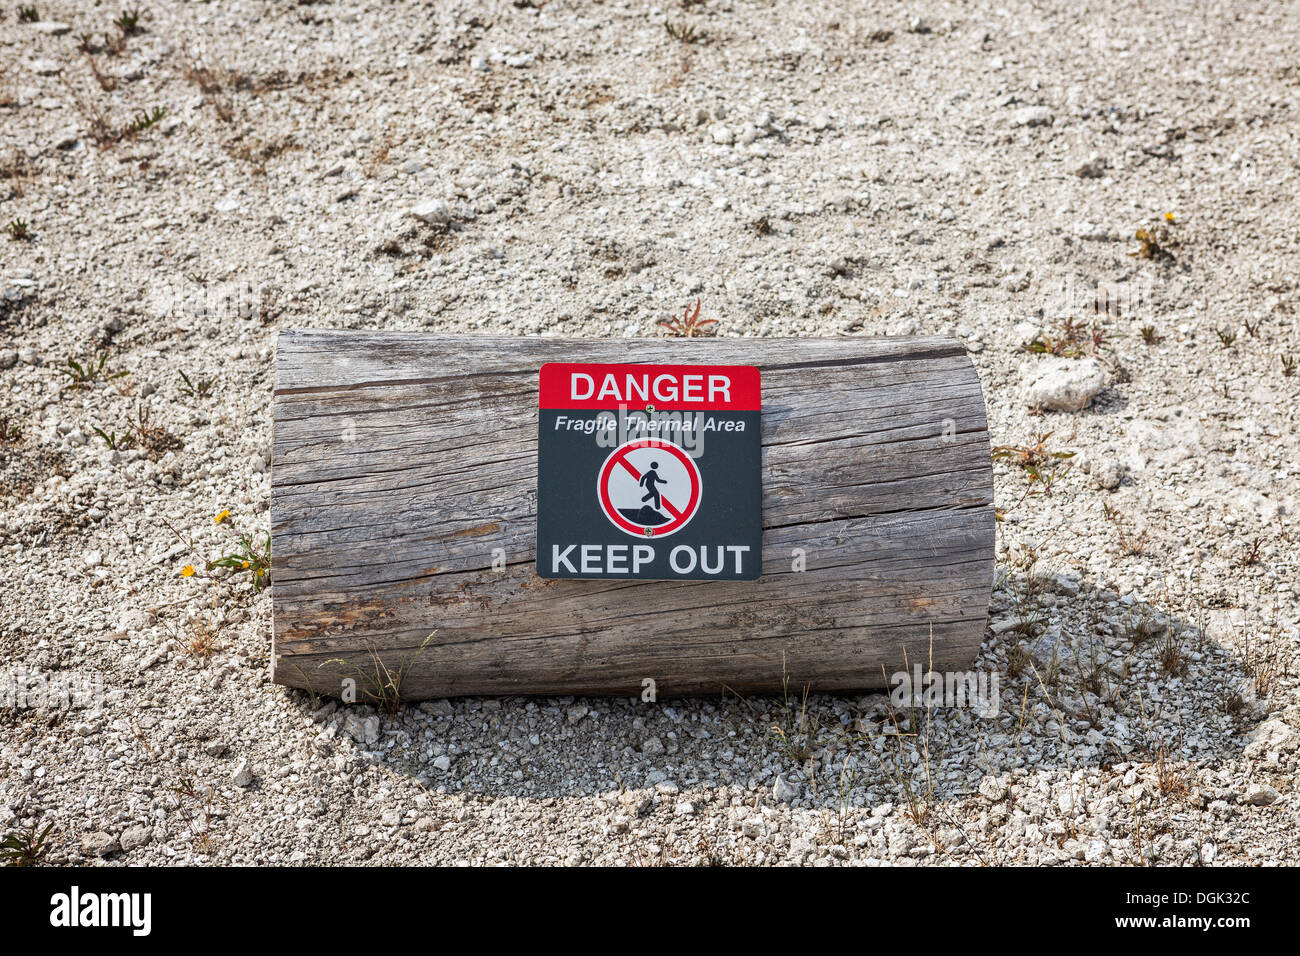 Warning sign telling of geothermal danger in West Thumb Geyser Basin, Yellowstone National Park, Wyoming Stock Photo